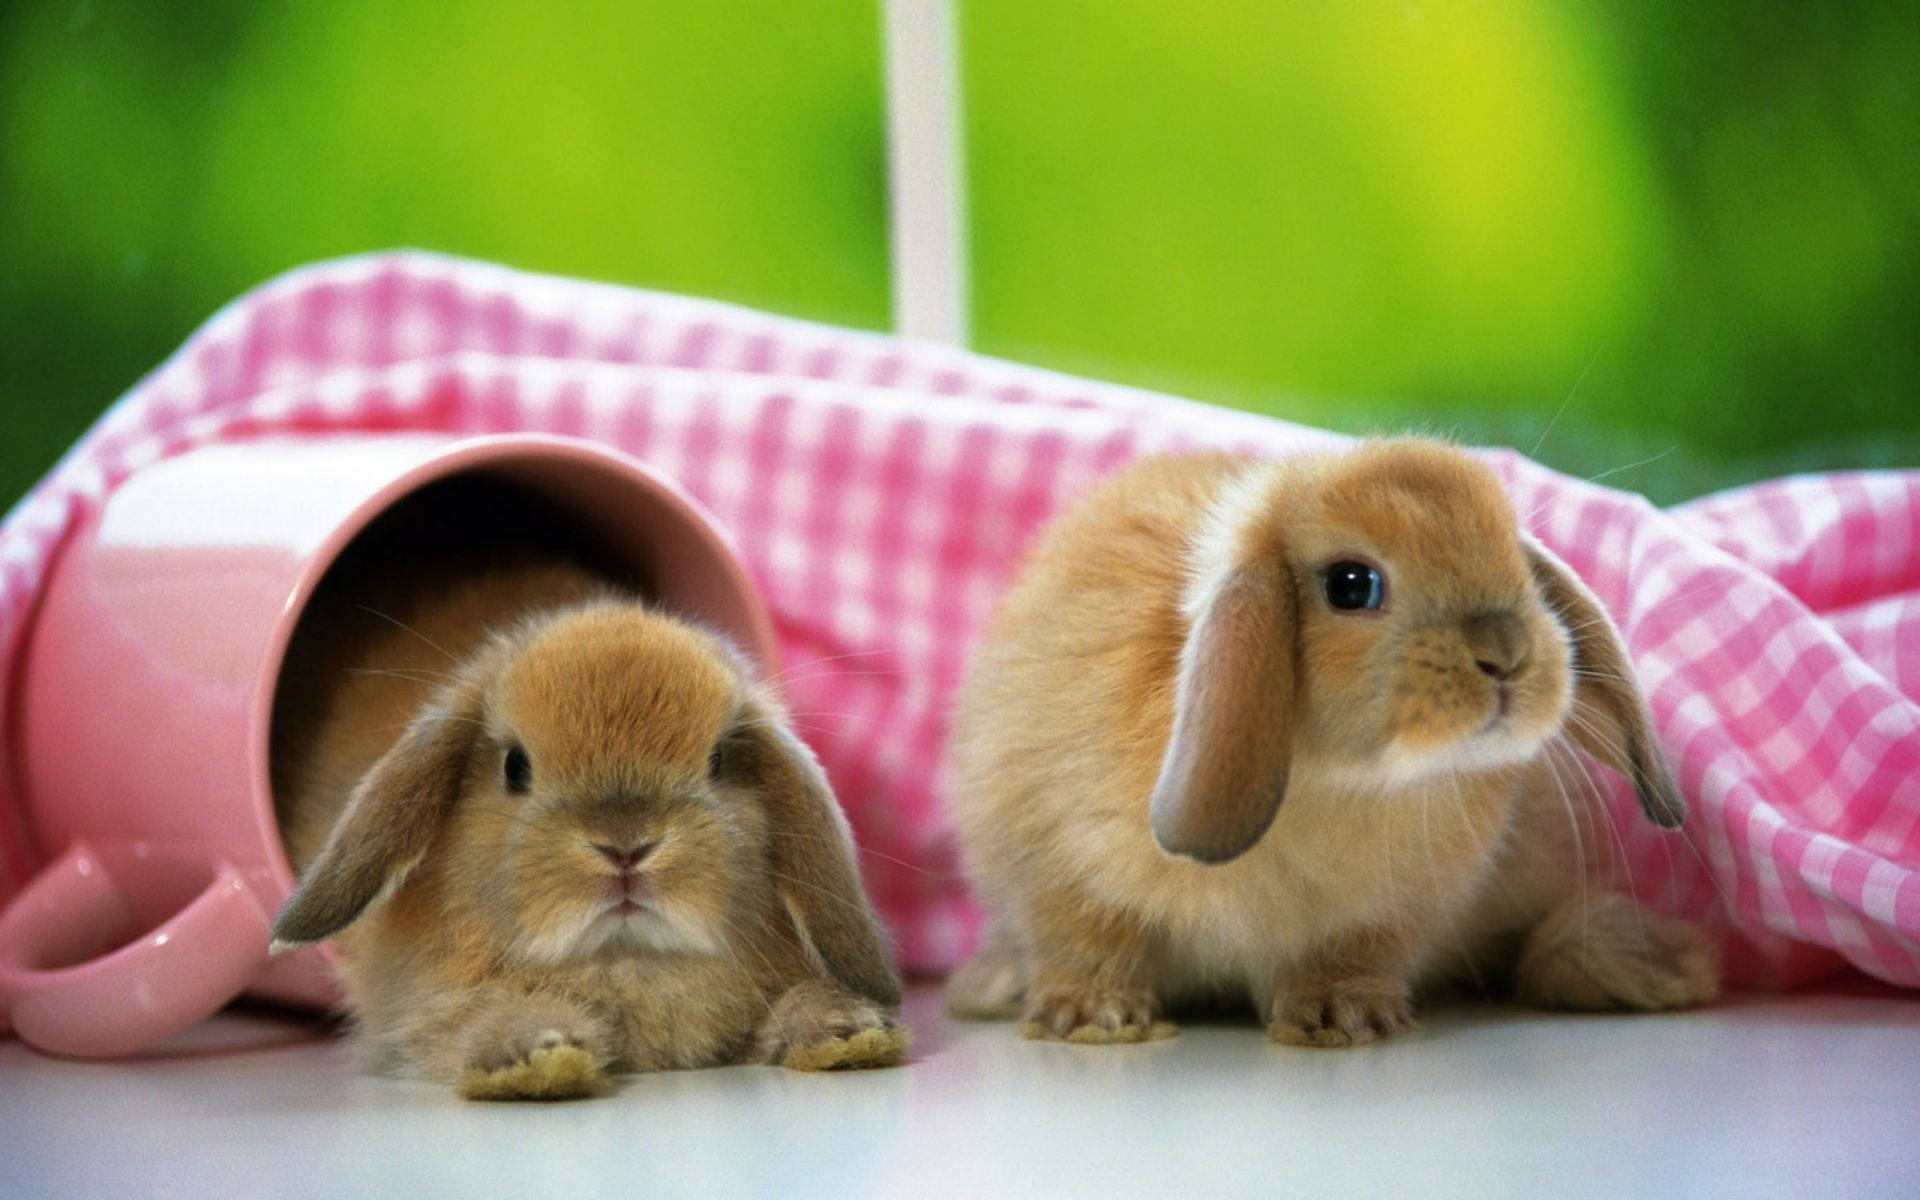 Free Bunny Wallpaper Downloads, [200+] Bunny Wallpapers for FREE |  